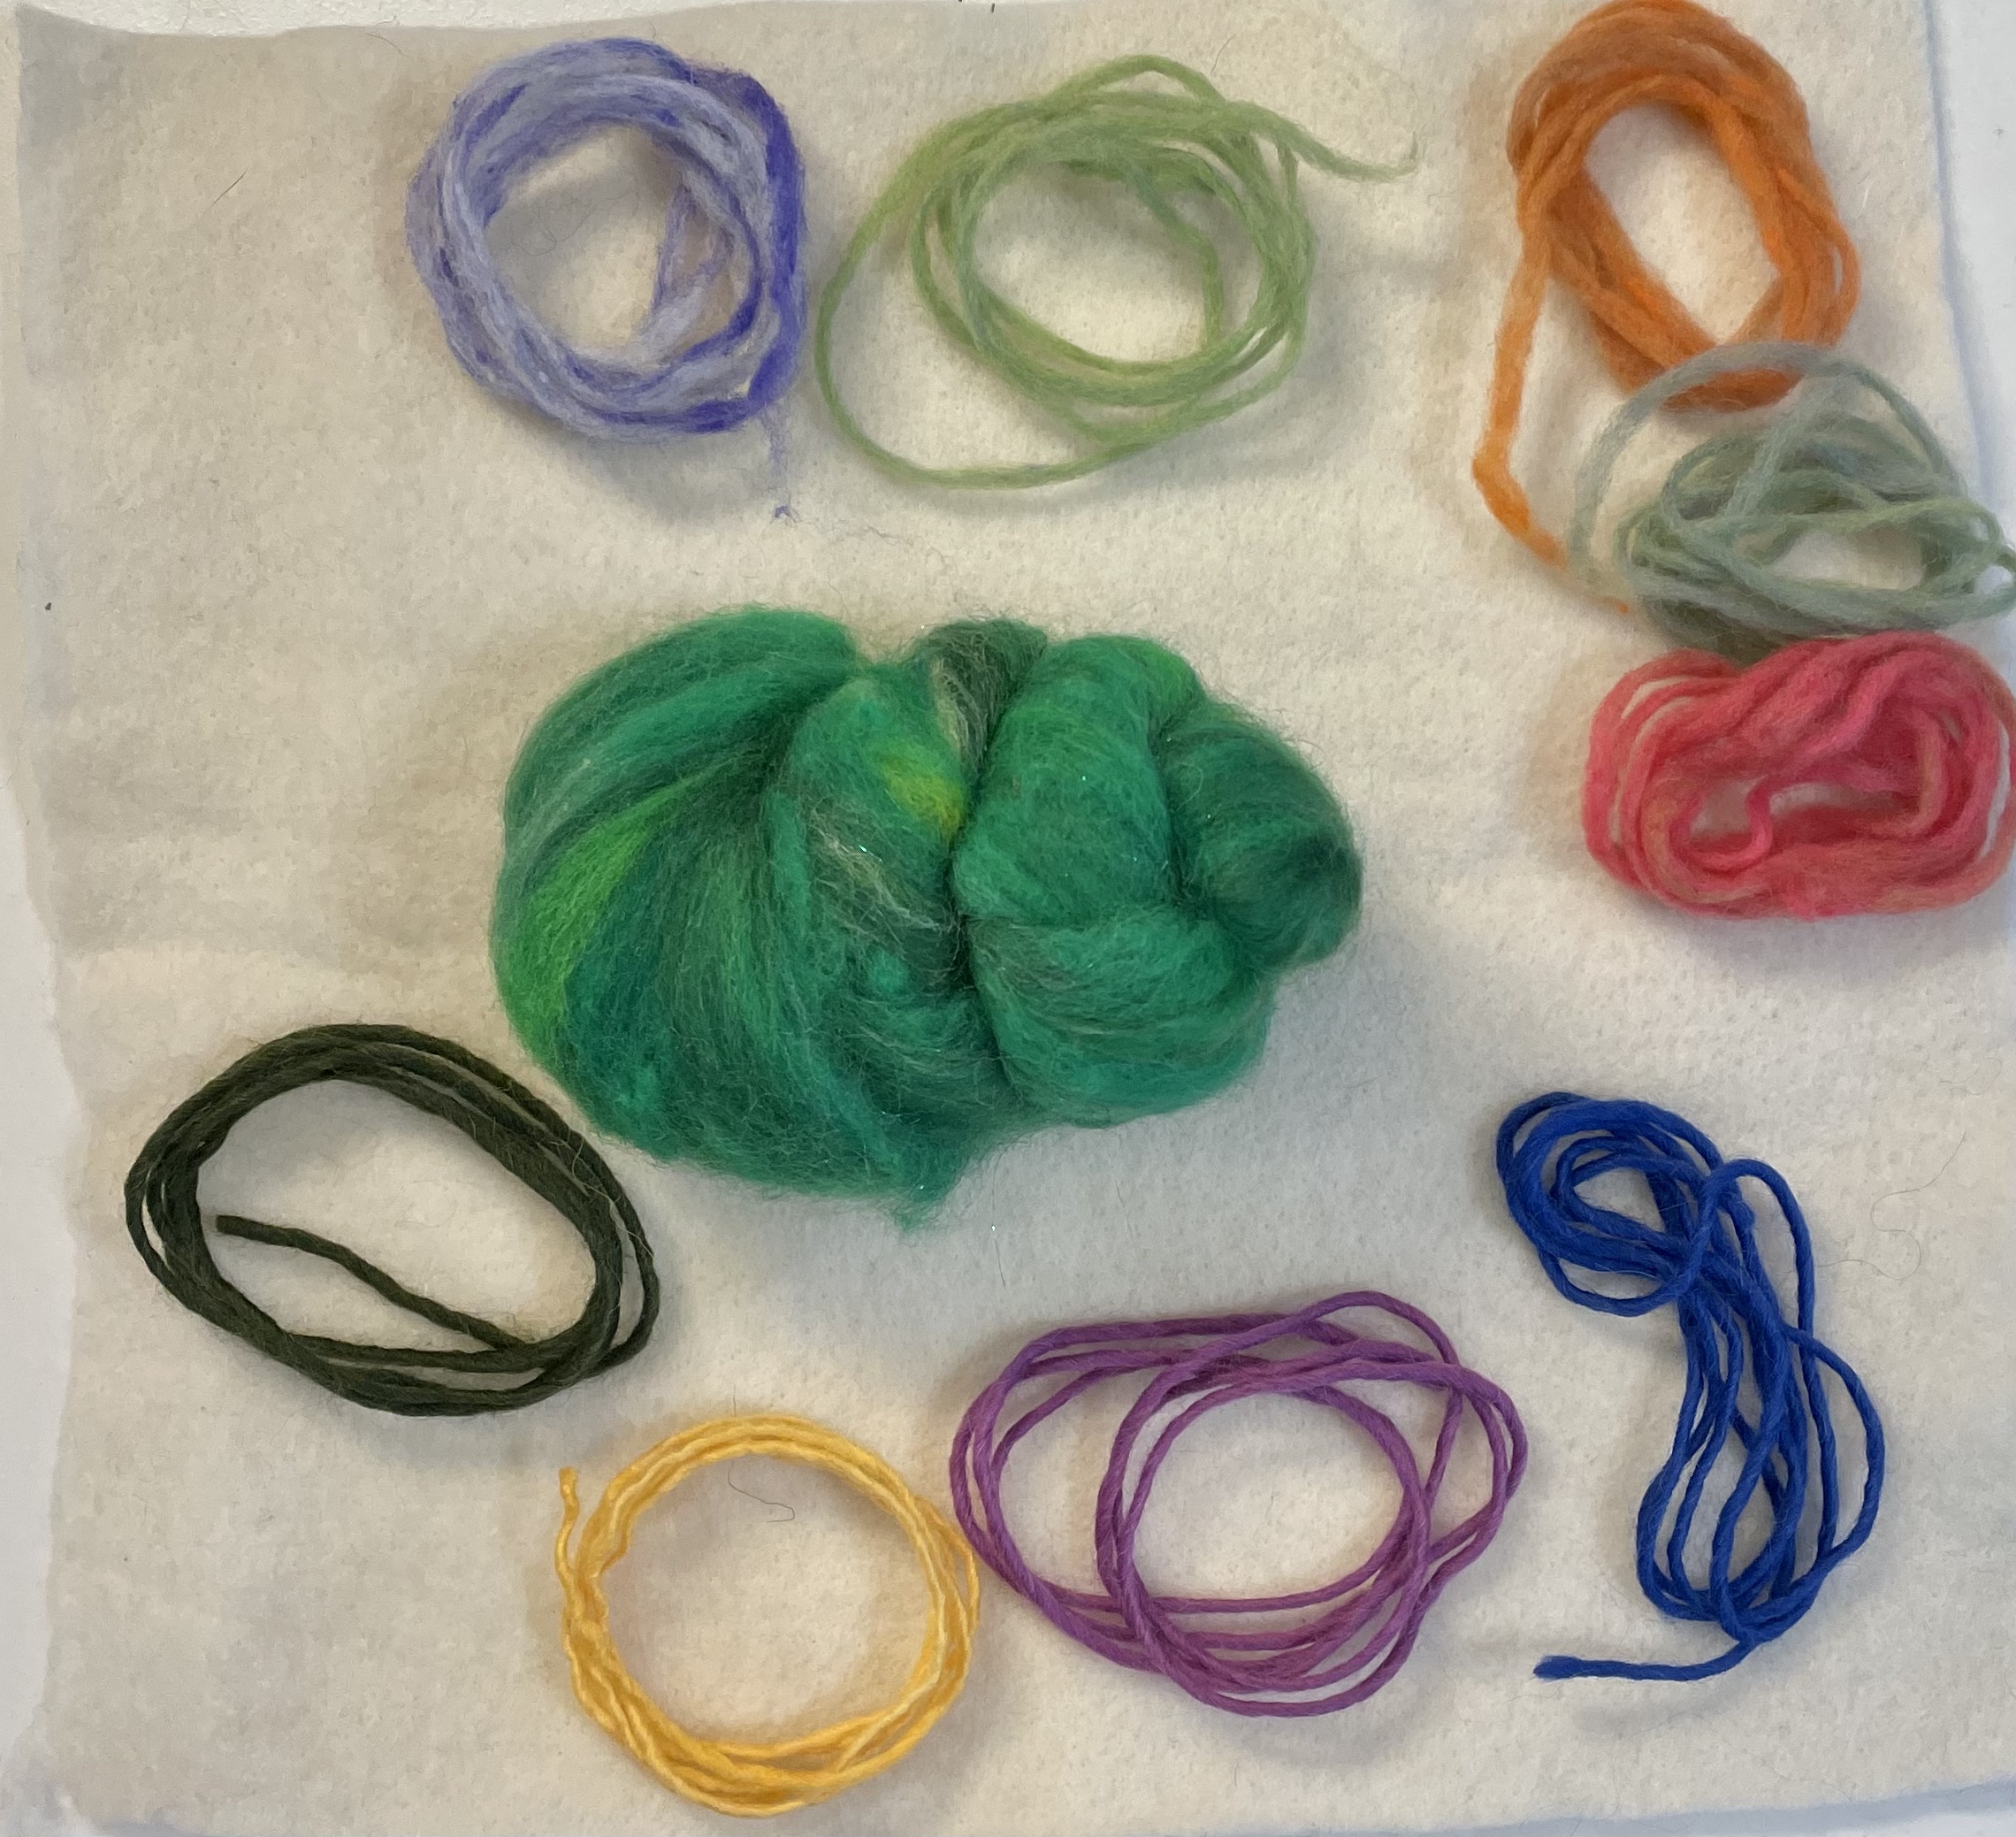 Felting materials, string, roving in all colors for your peace mandala